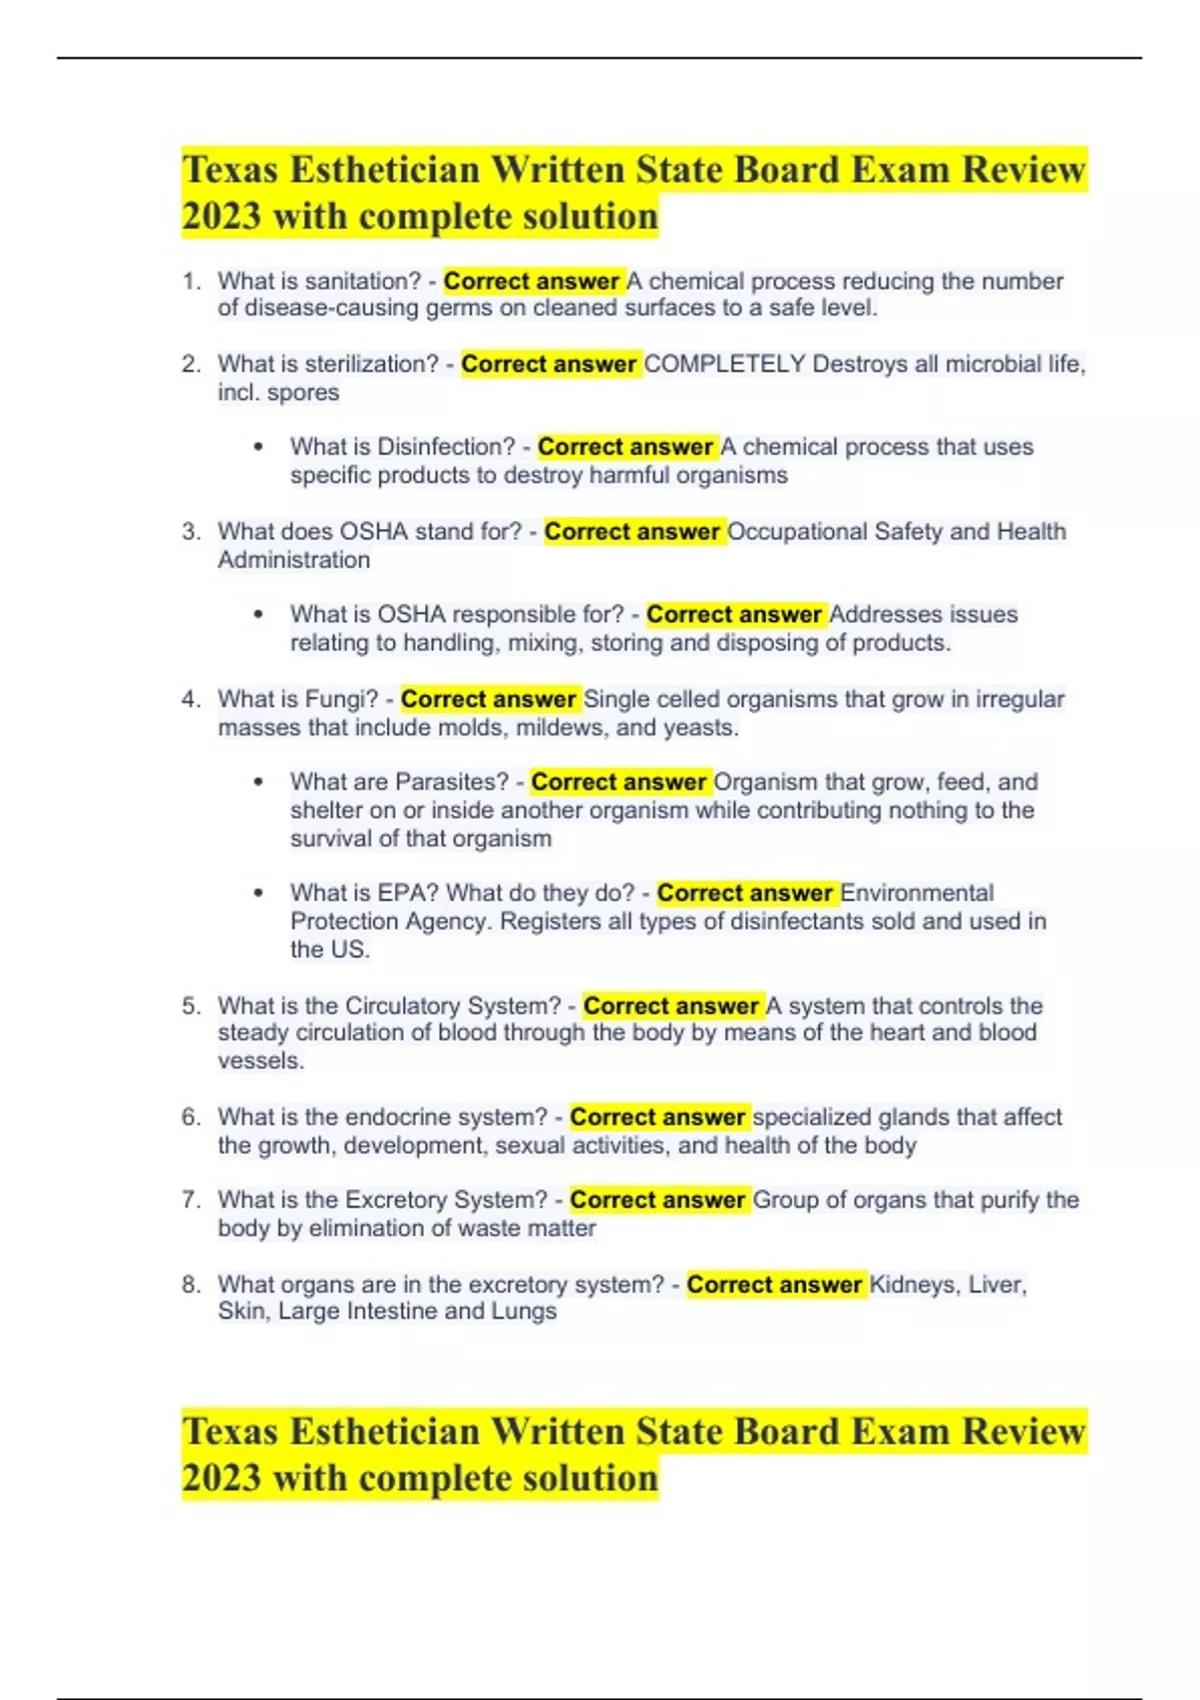 Texas Esthetician Written State Board Exam Review 2023 with complete